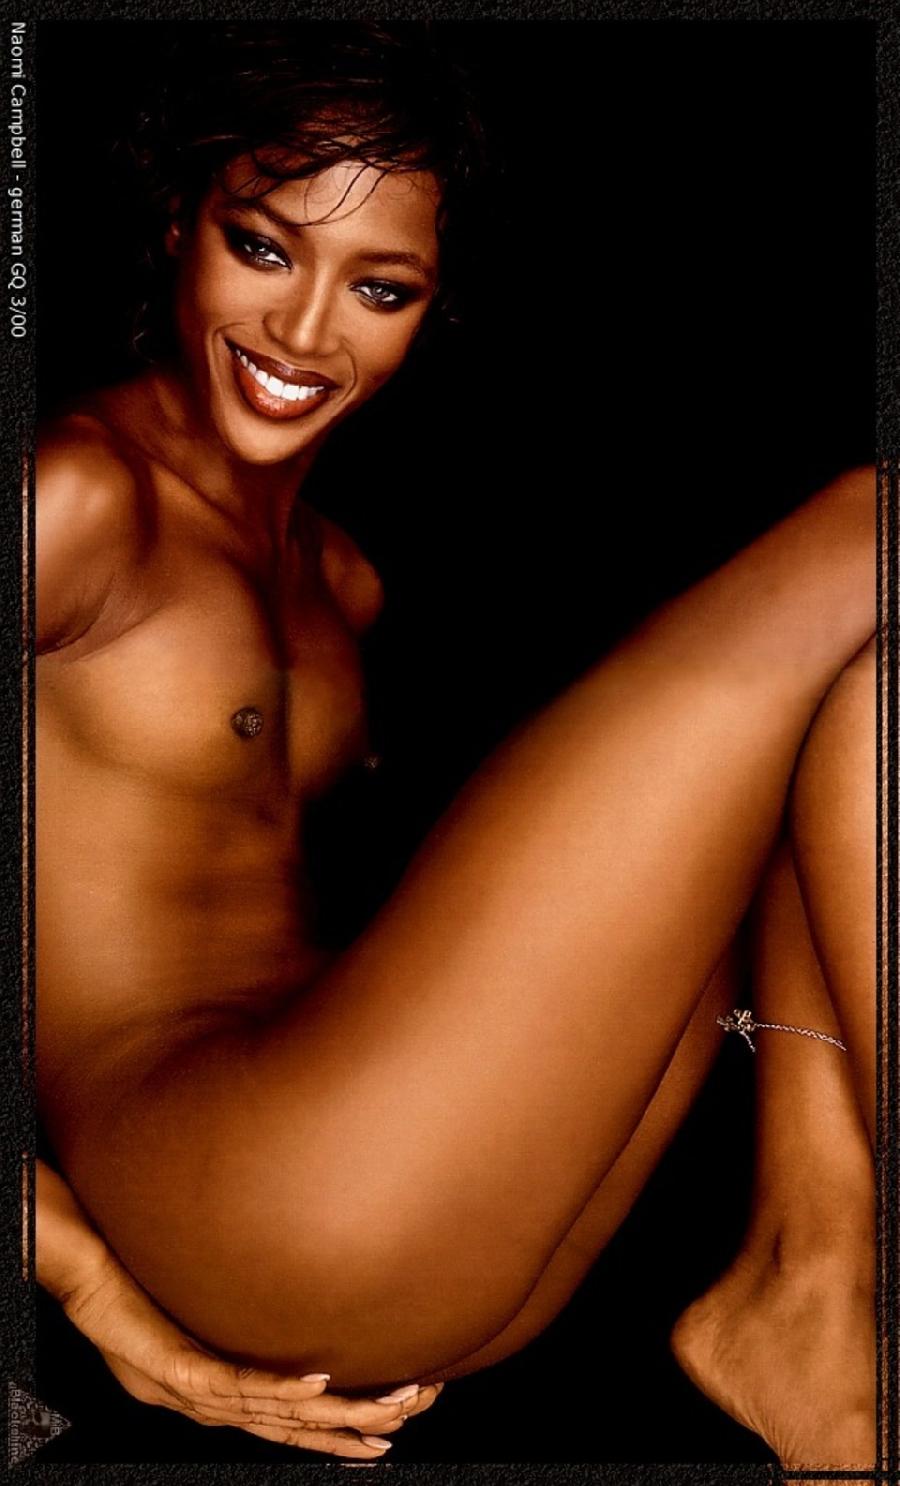 Gallery With Naomi Campbell 15 Pics